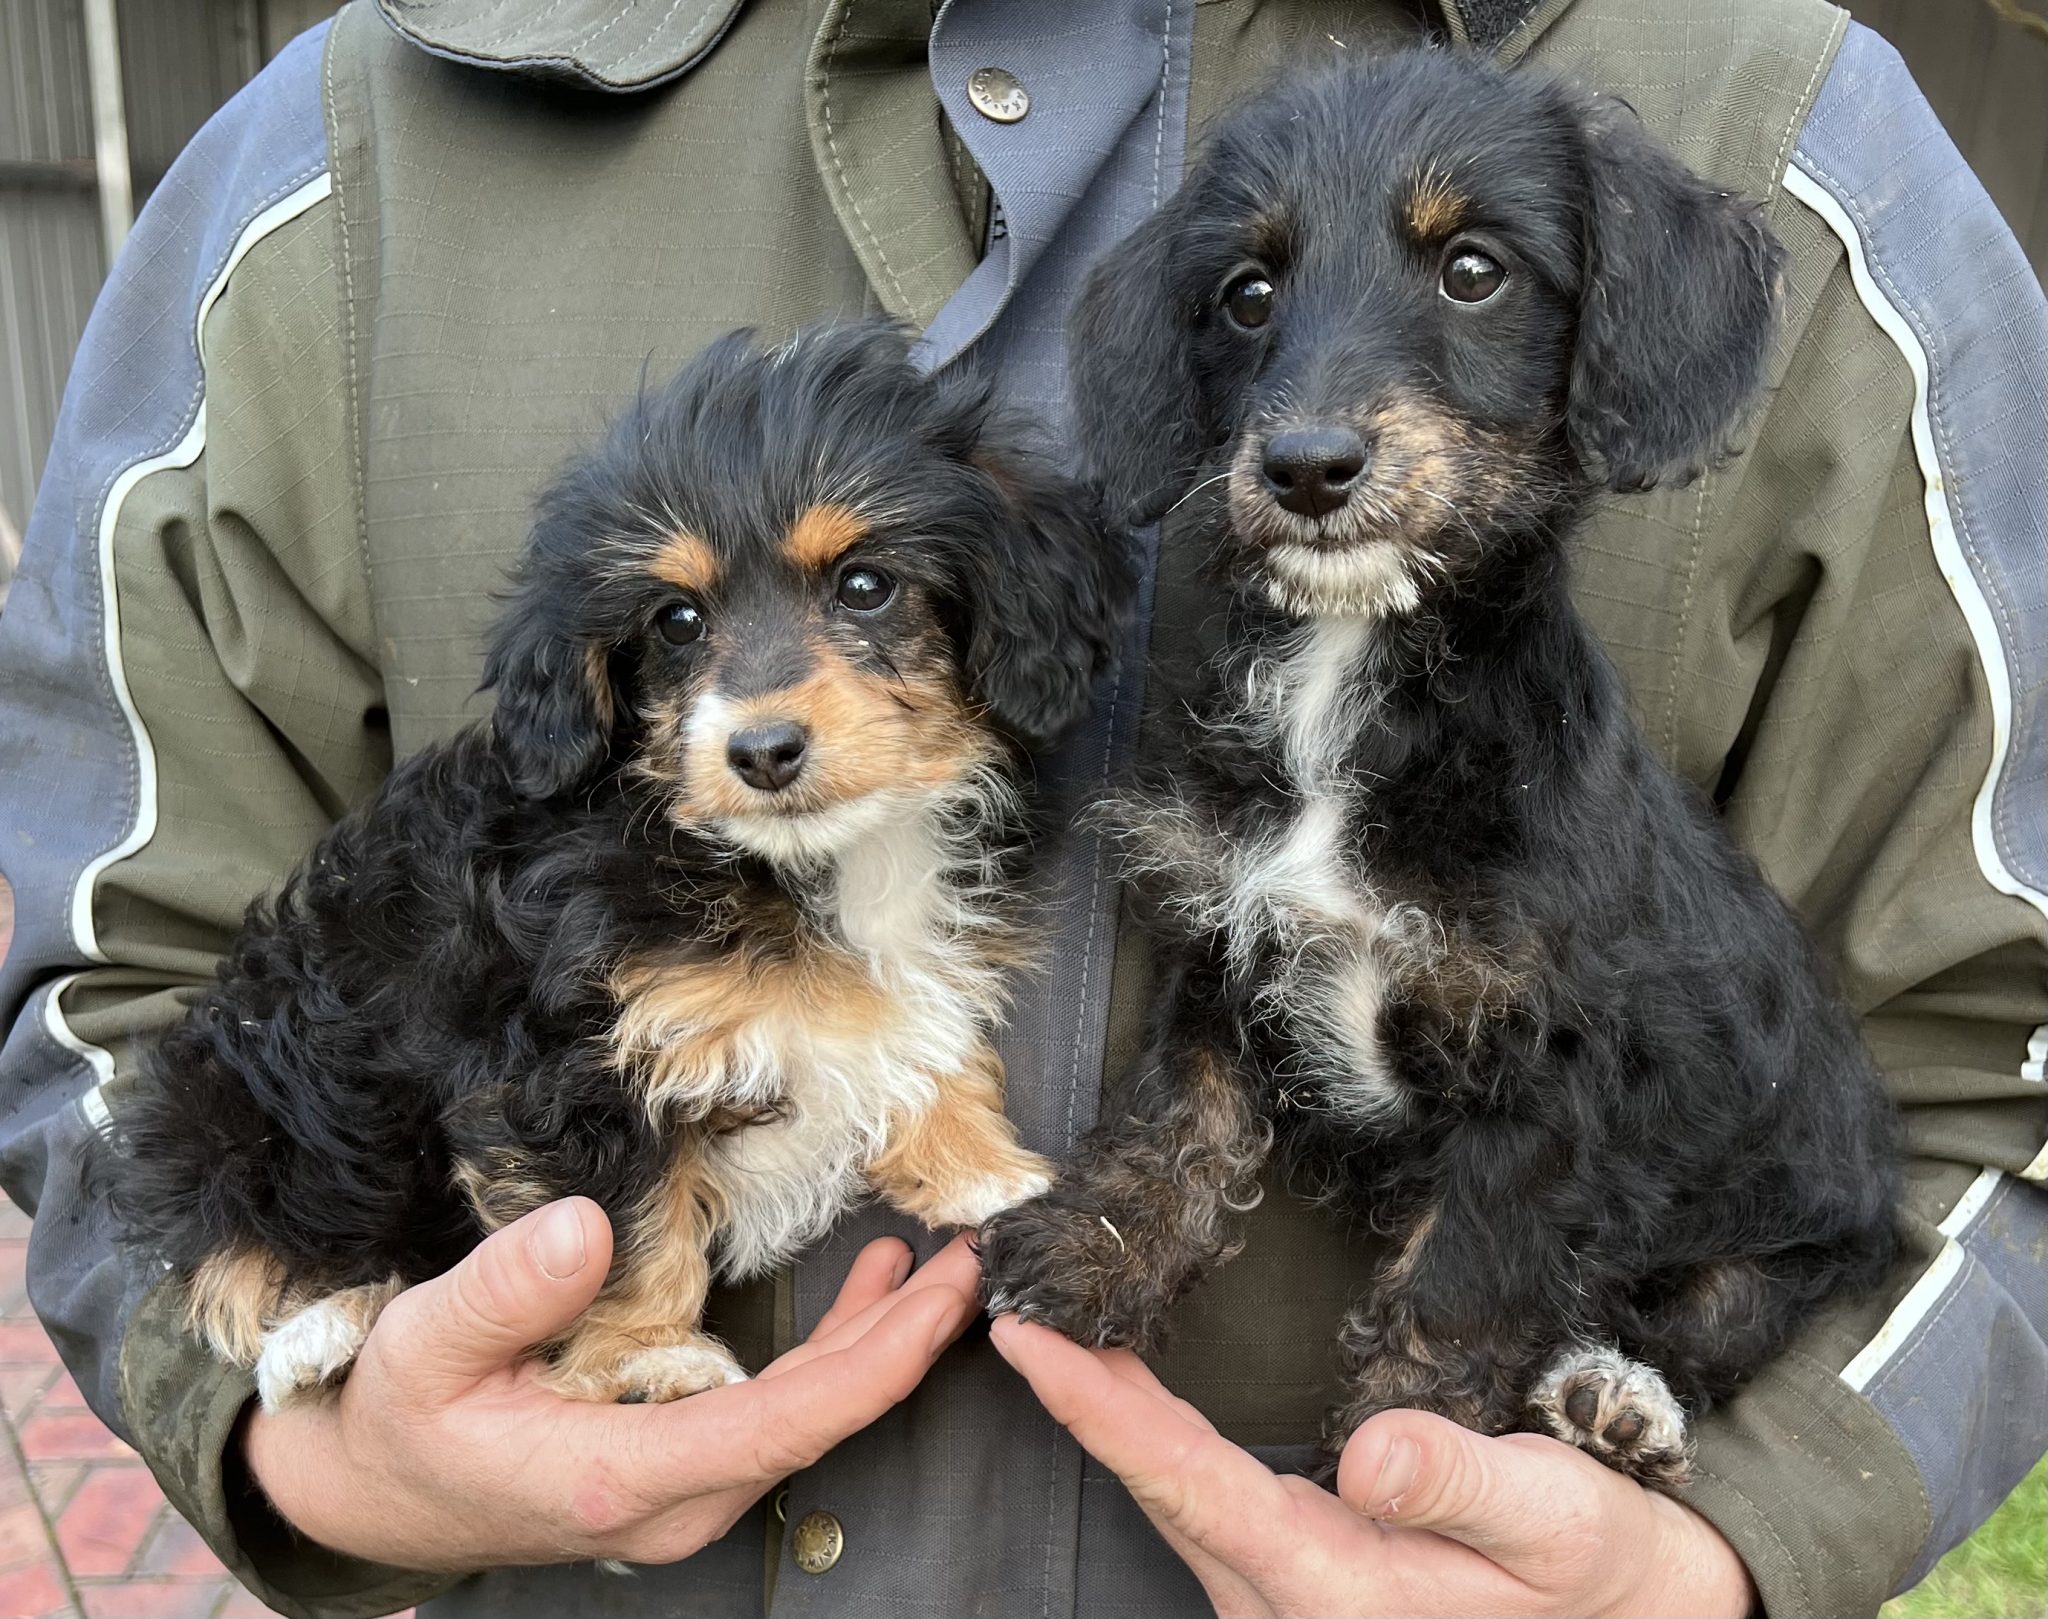 Dachshund x poodle puppies